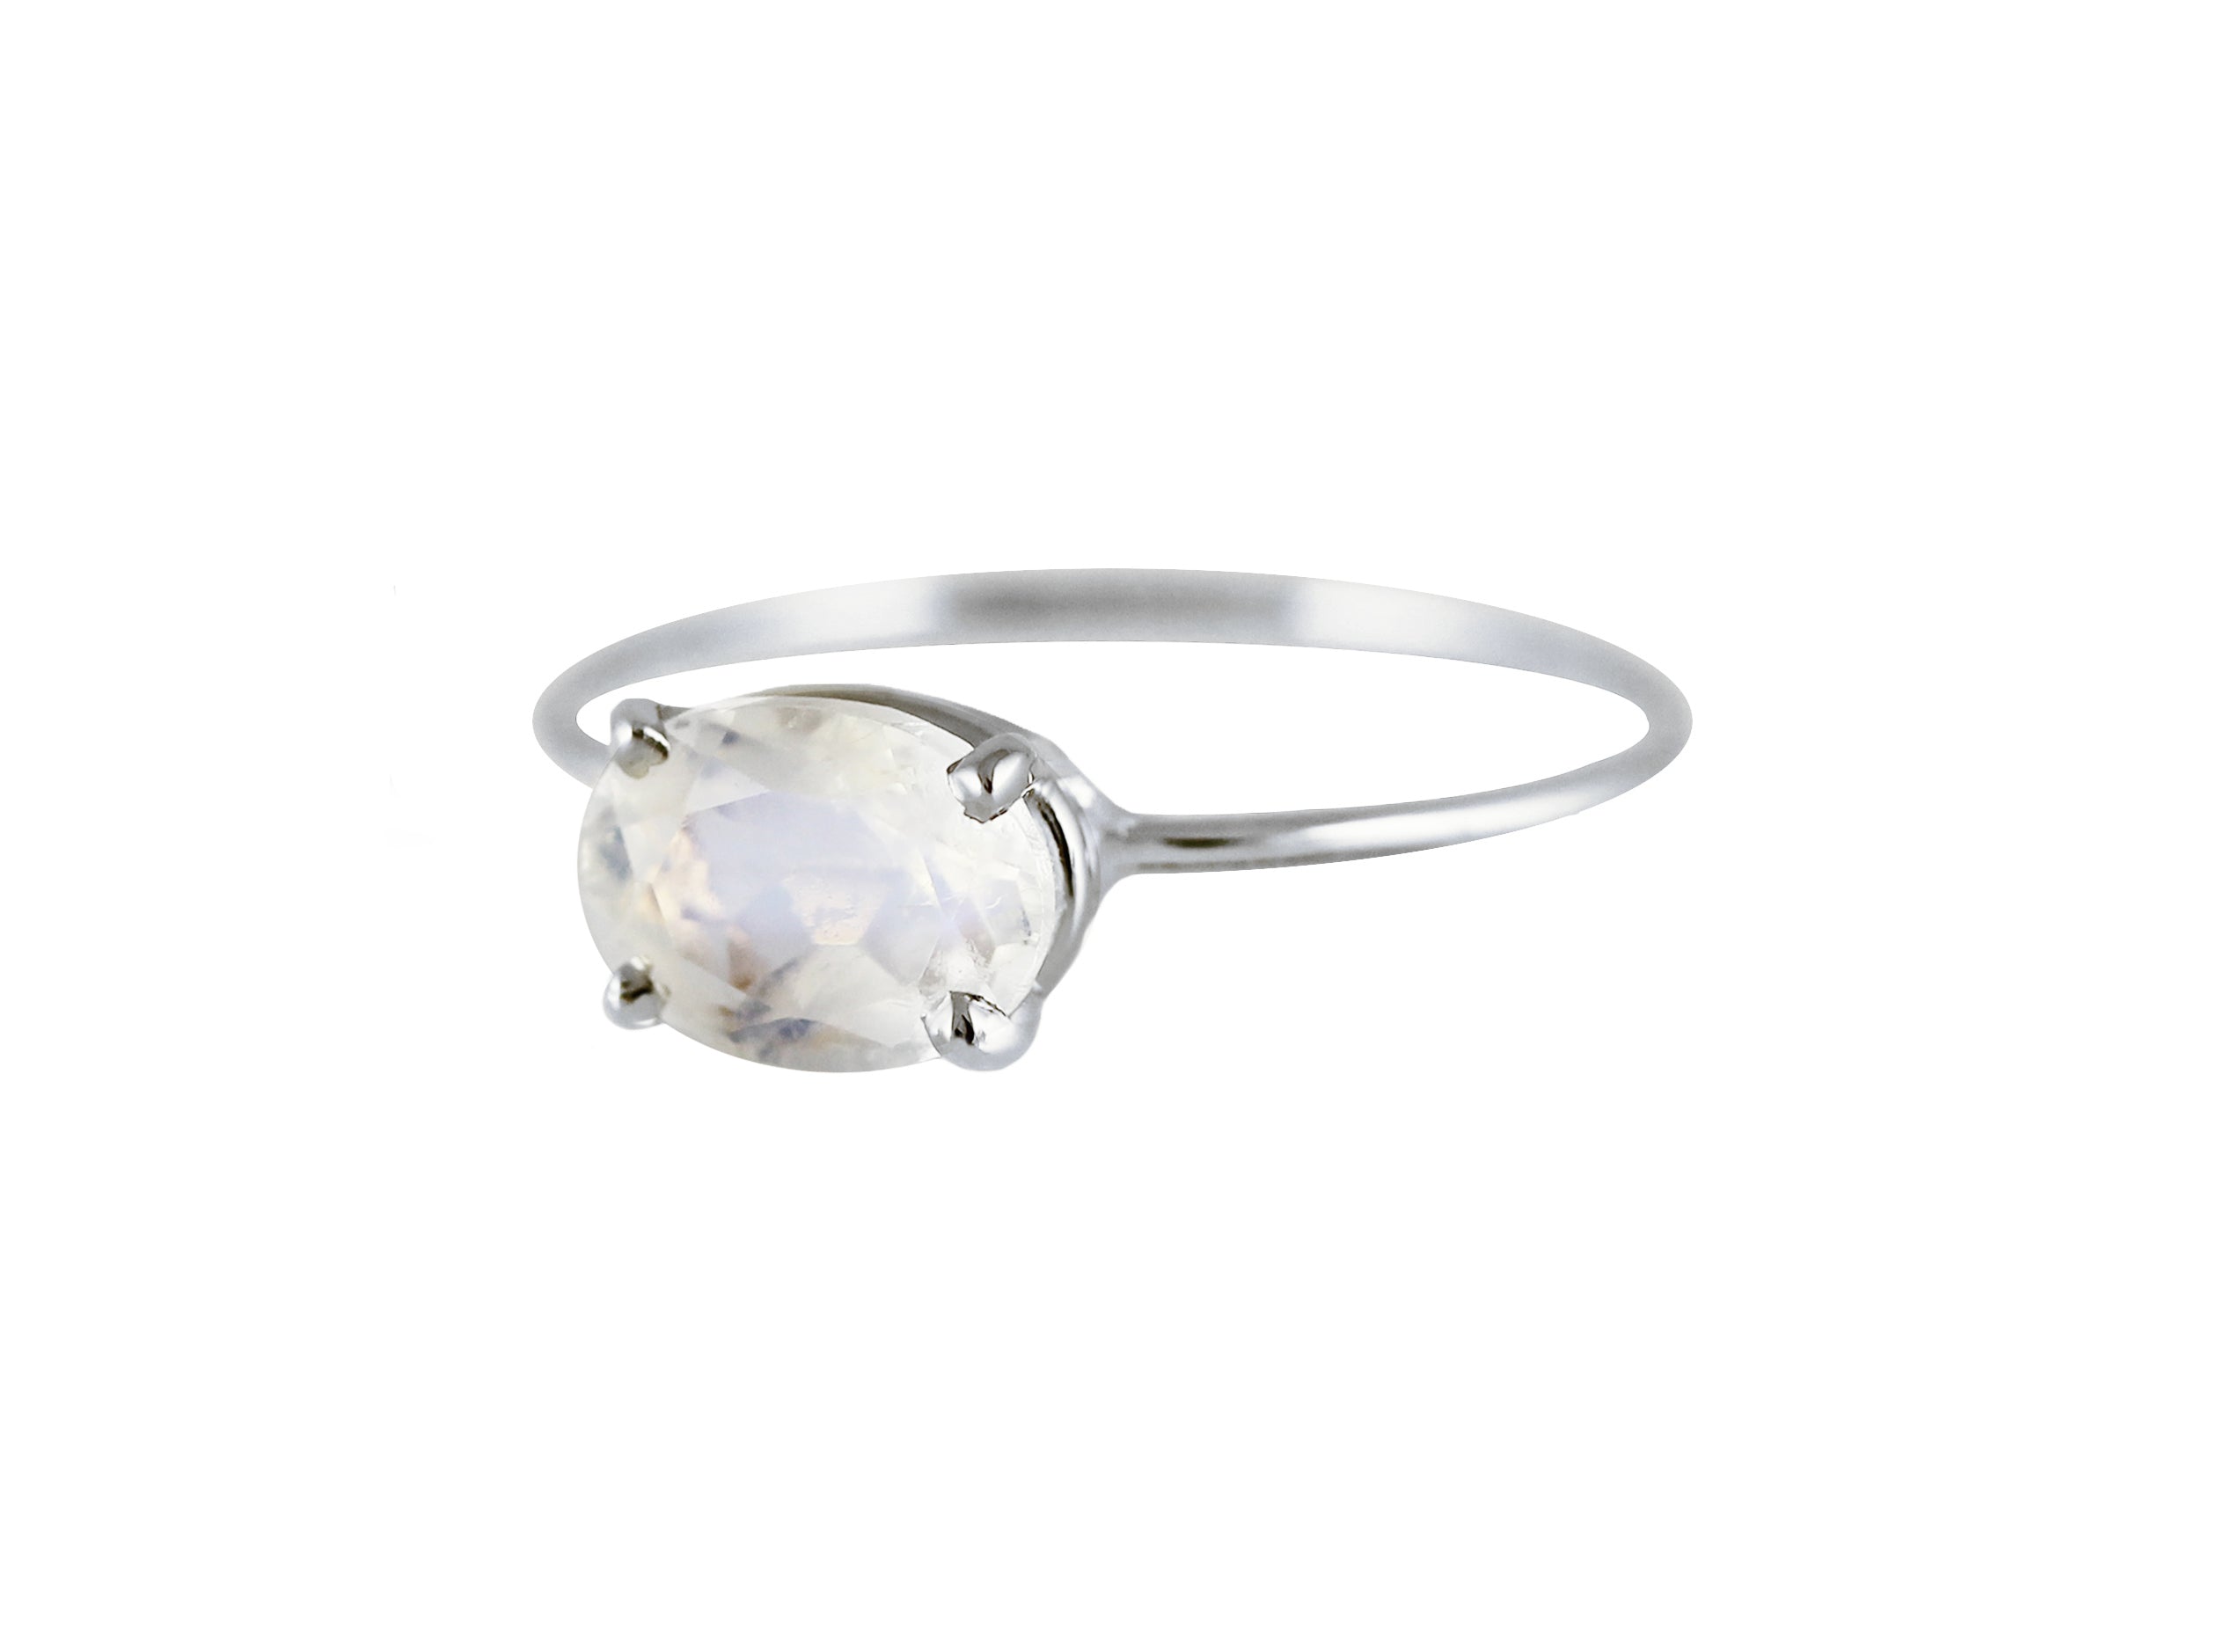 OVAL FACETED RAINBOW MOONSTONE RING